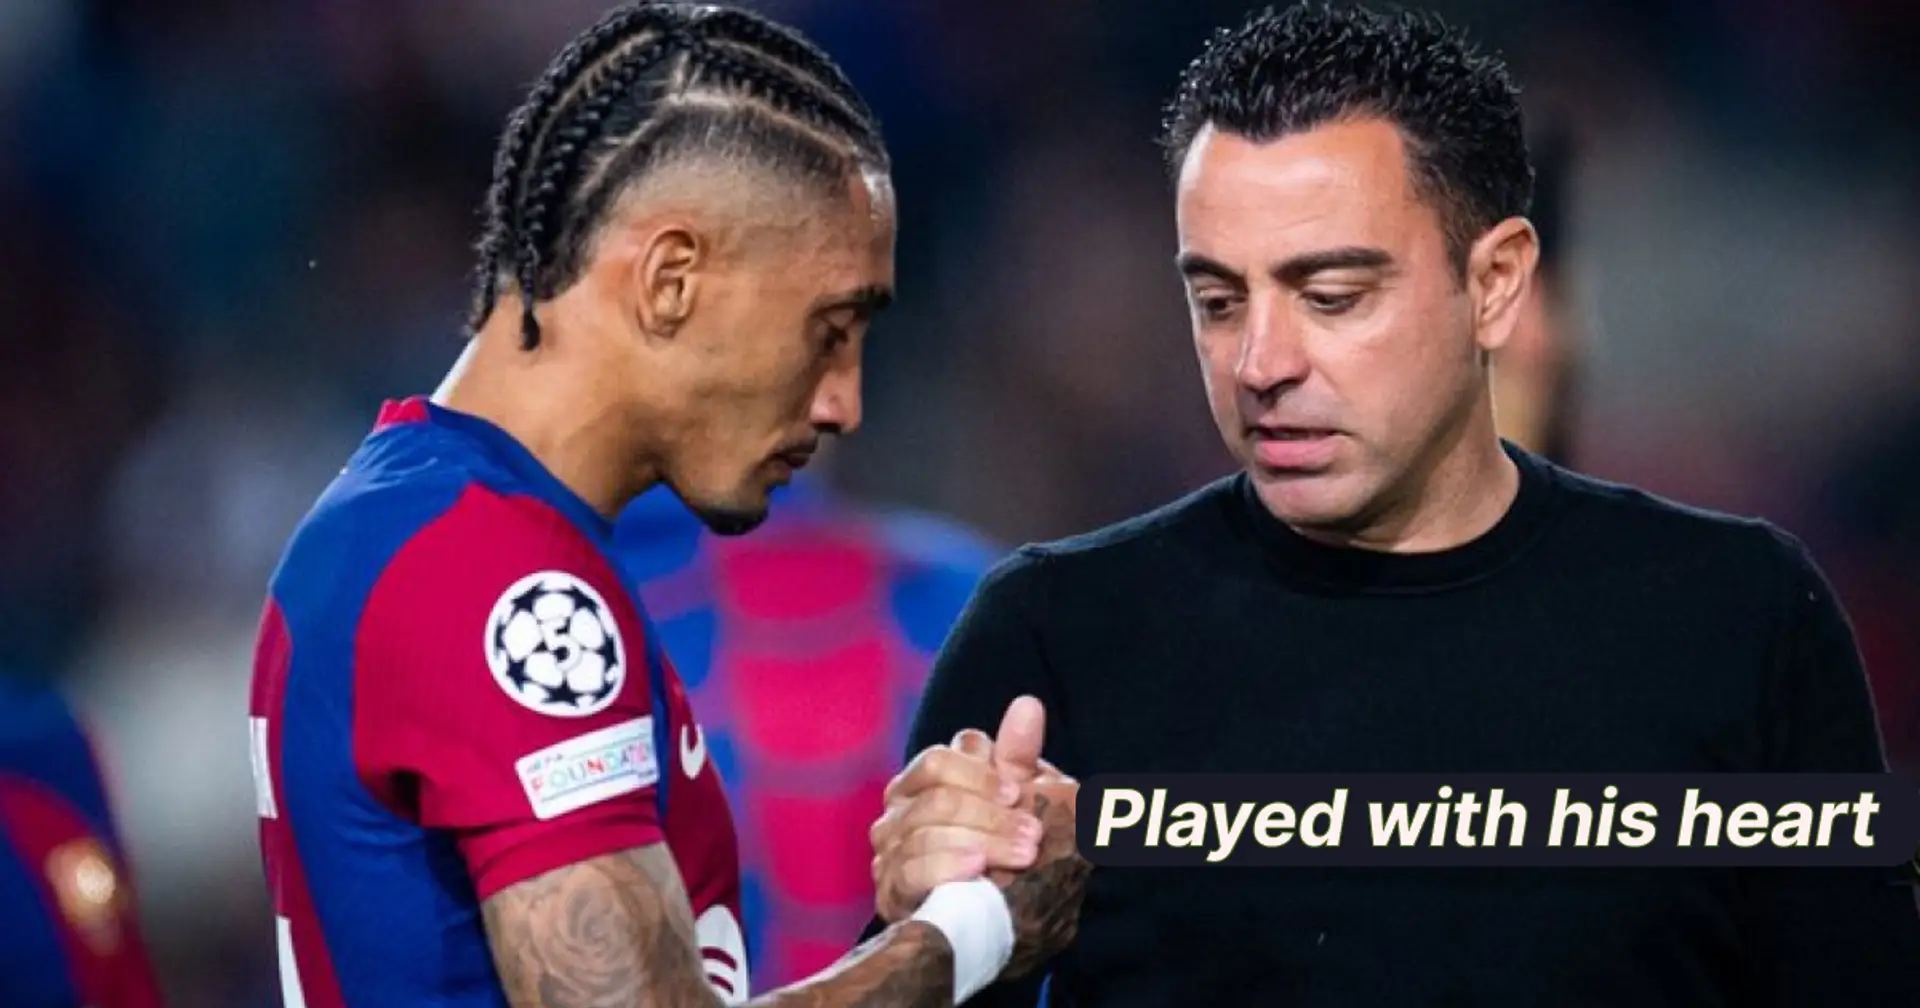 'I'm proud of them': Barca fans name TWO players who had a great game despite 4-1 loss 